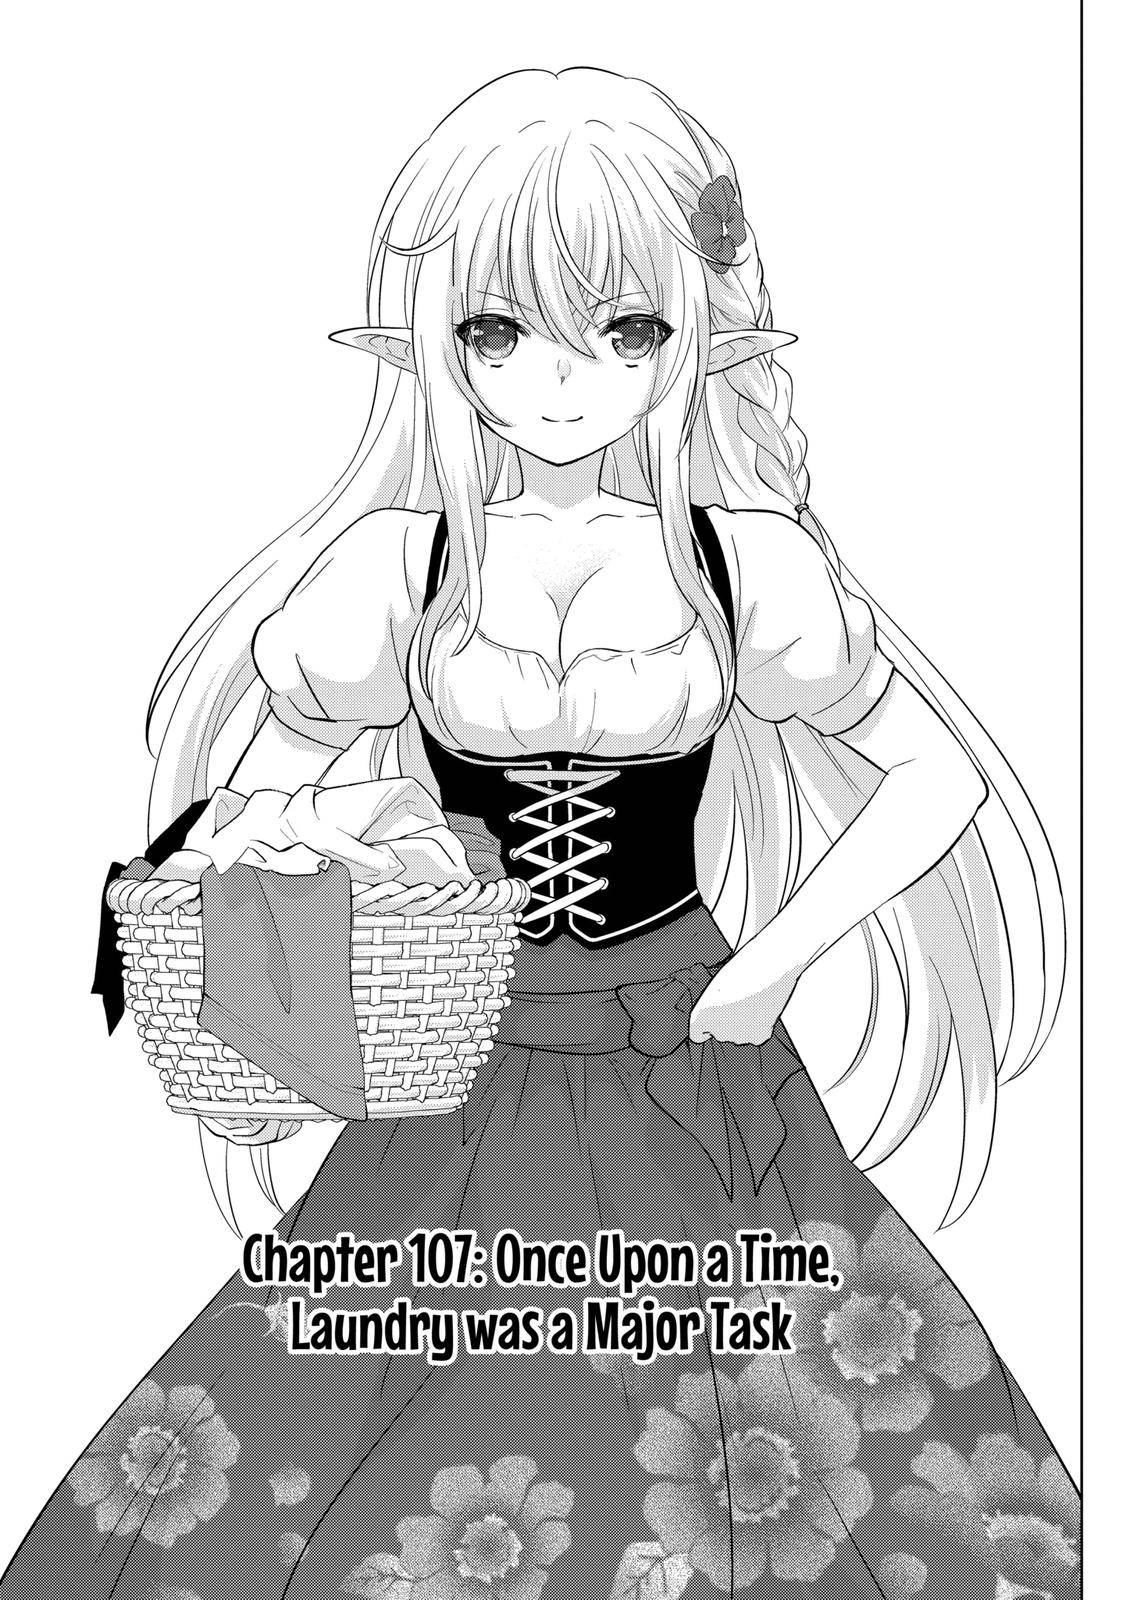 The fun life of the most powerful orc in history, creating a harem in an alternative world. Chapter 107